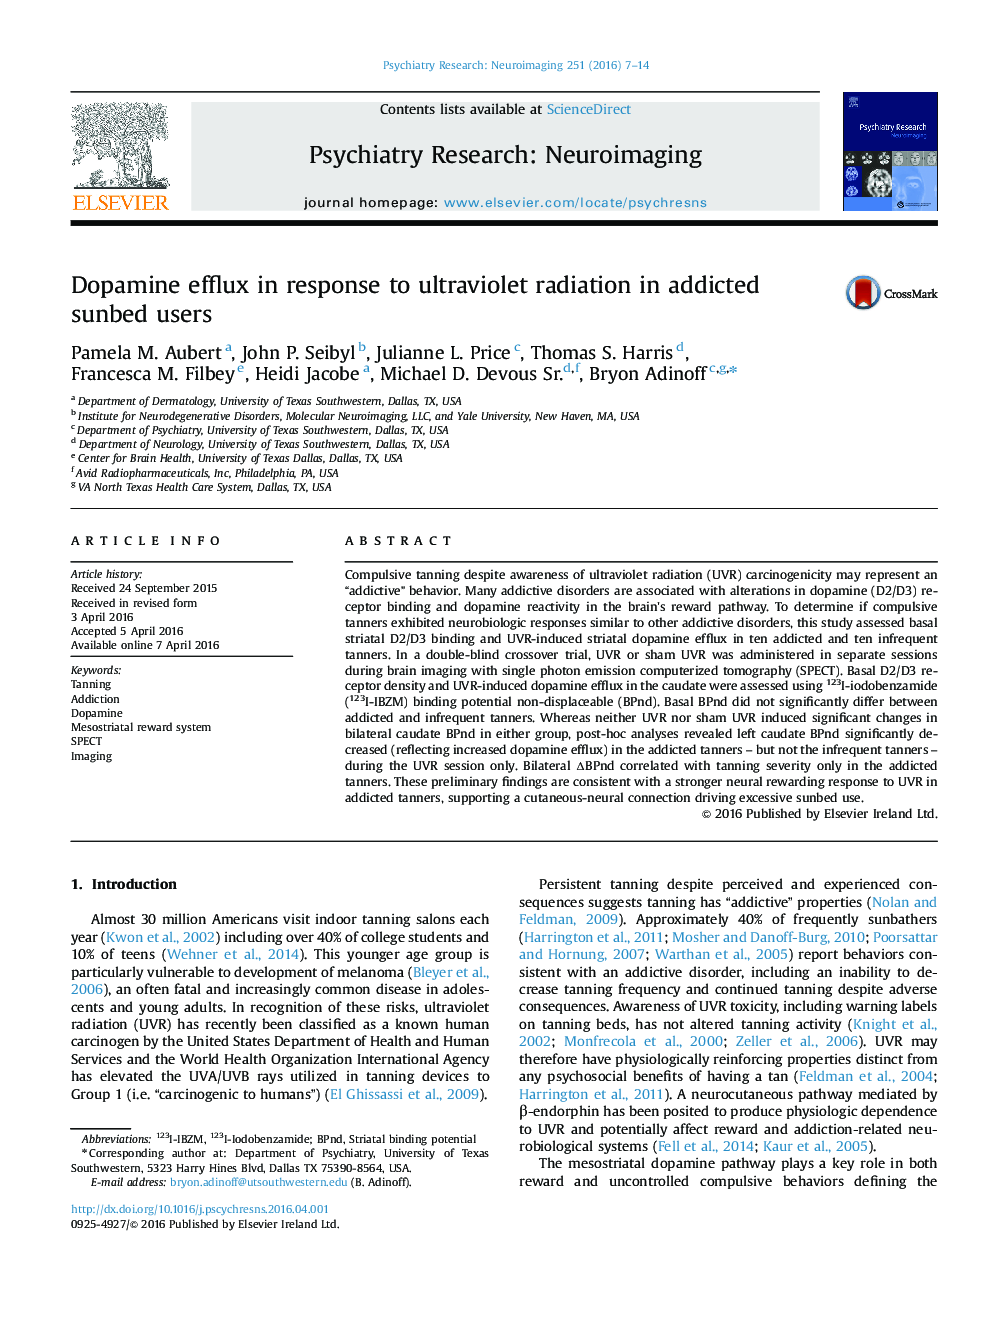 Dopamine efflux in response to ultraviolet radiation in addicted sunbed users